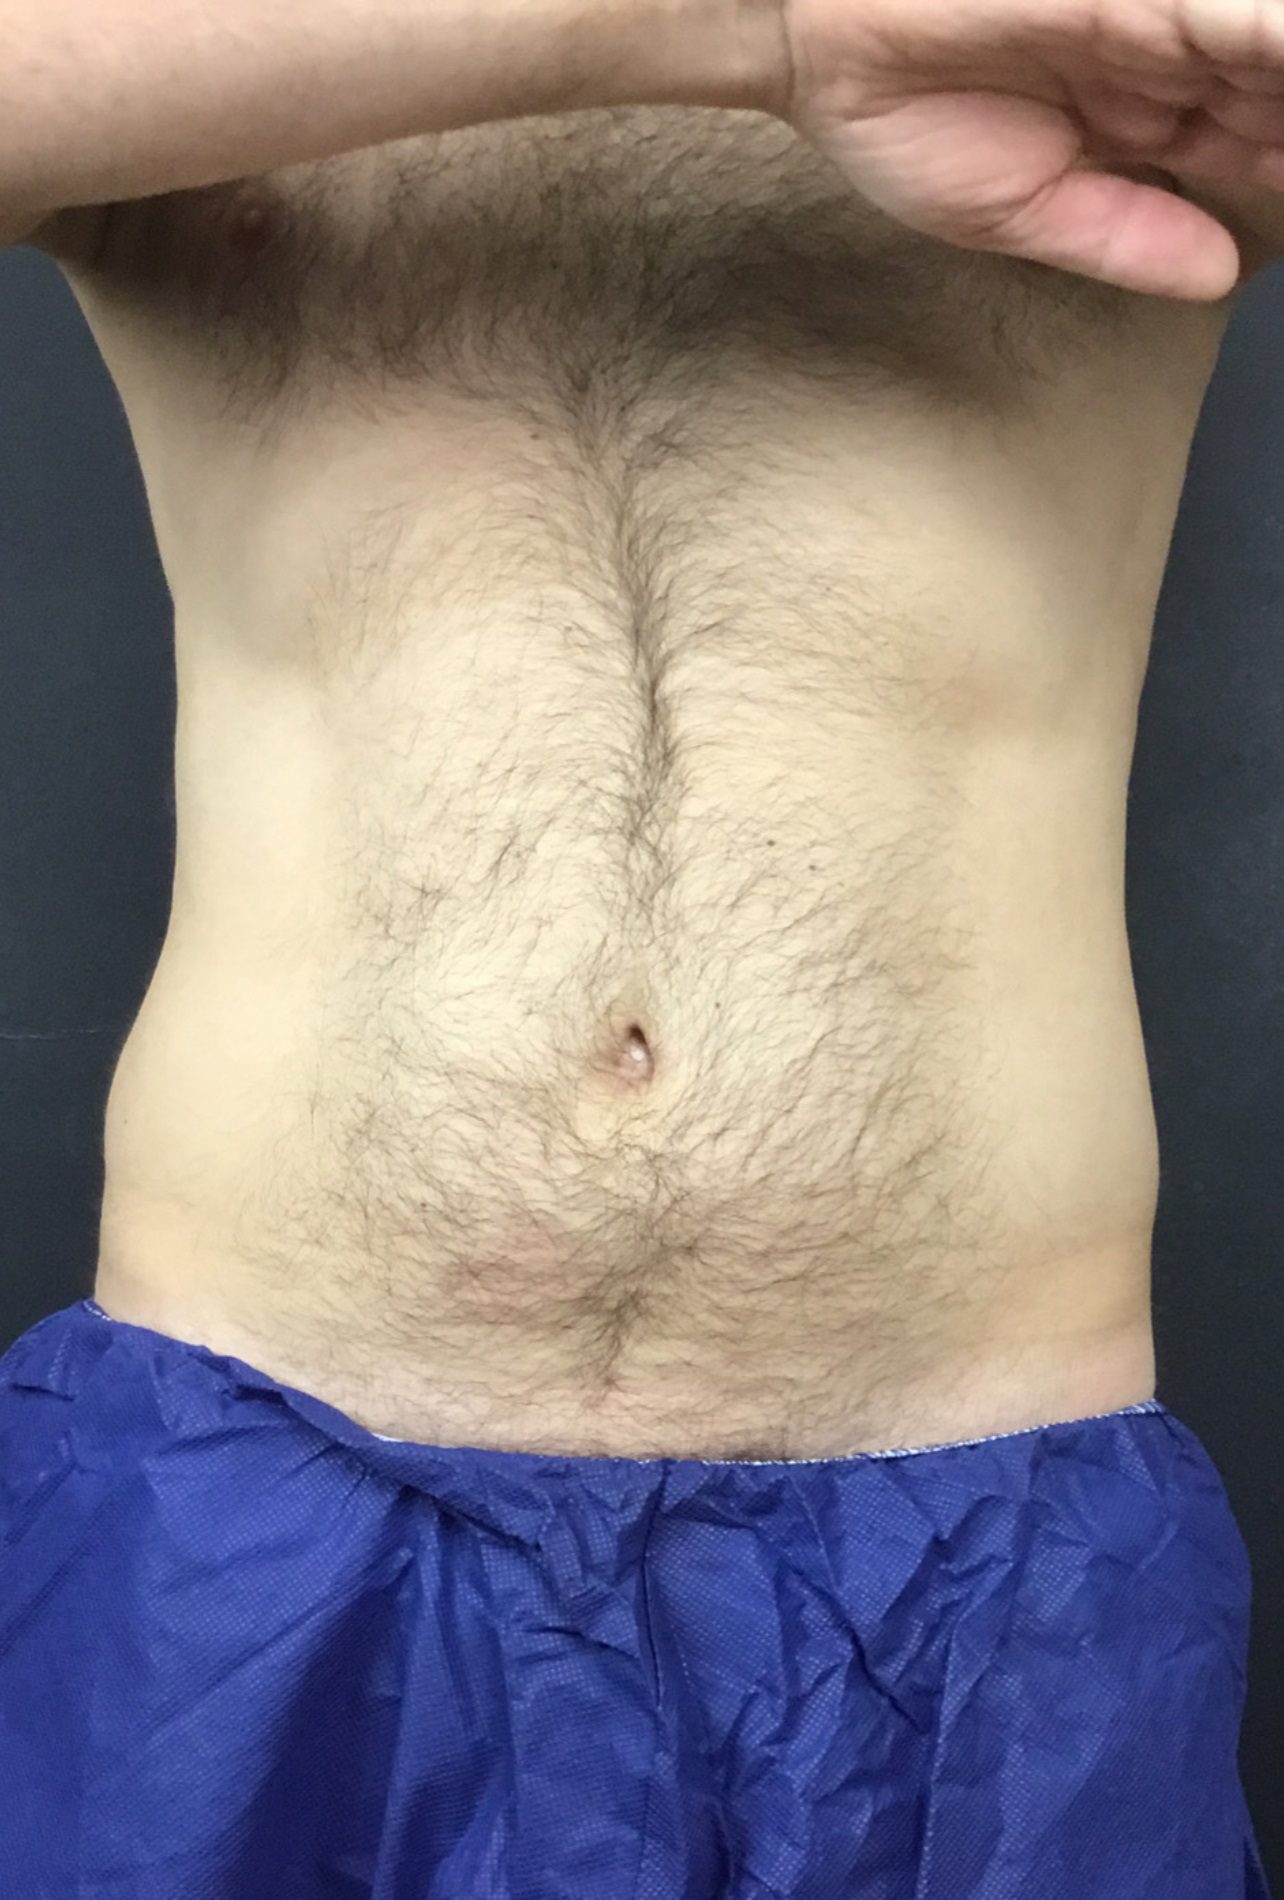 coolsculpting fat freezing flanks before